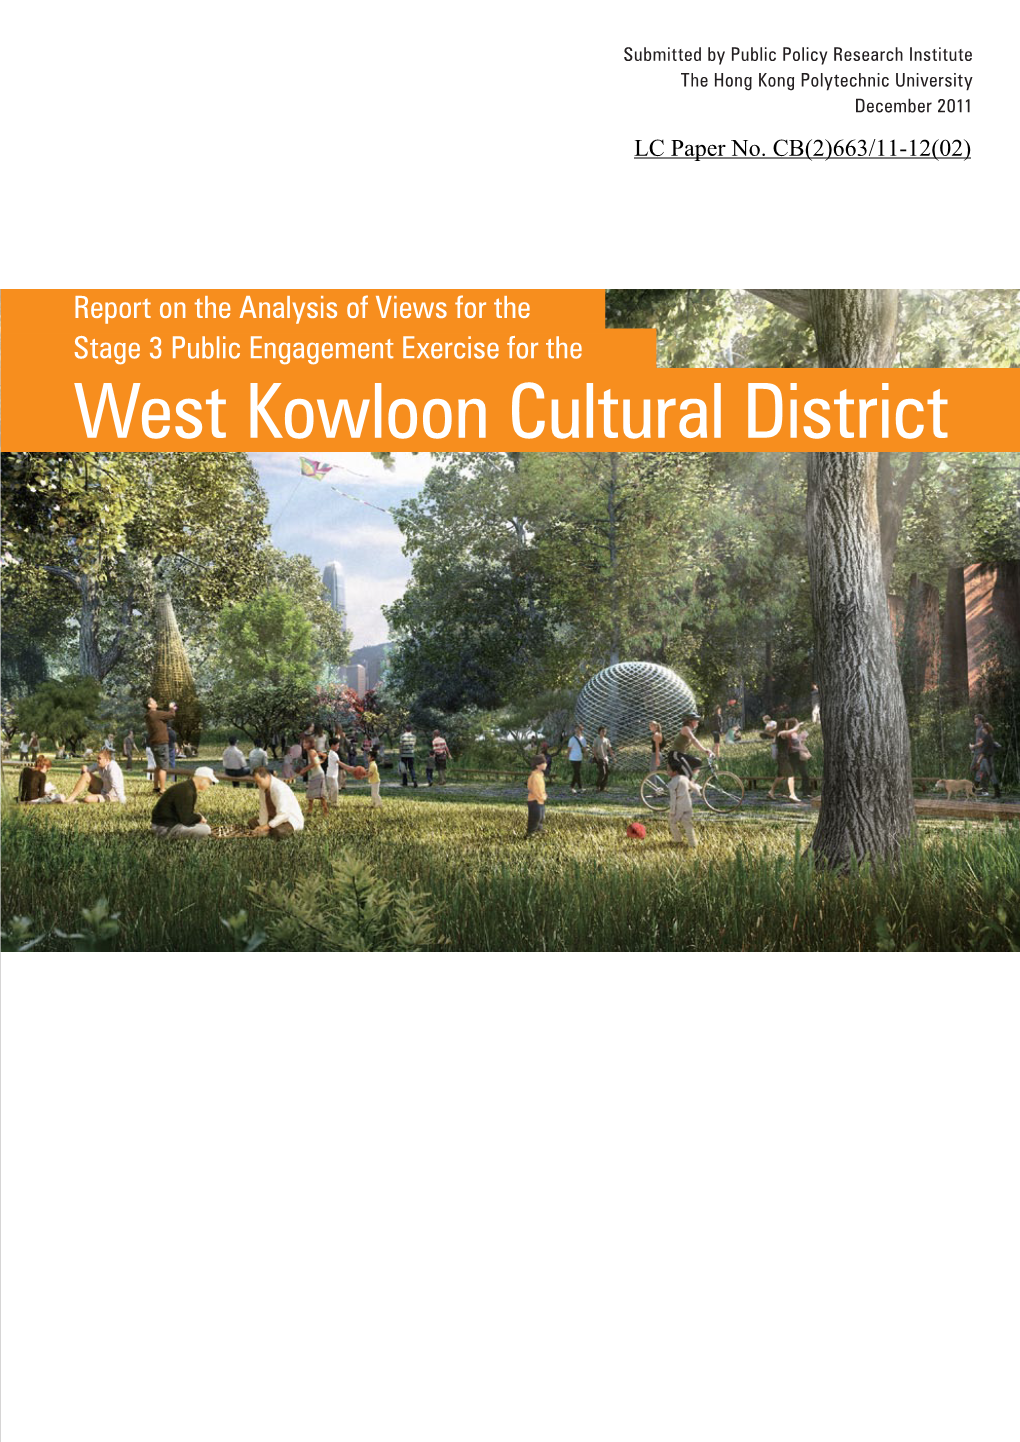 WKCD Report Cover